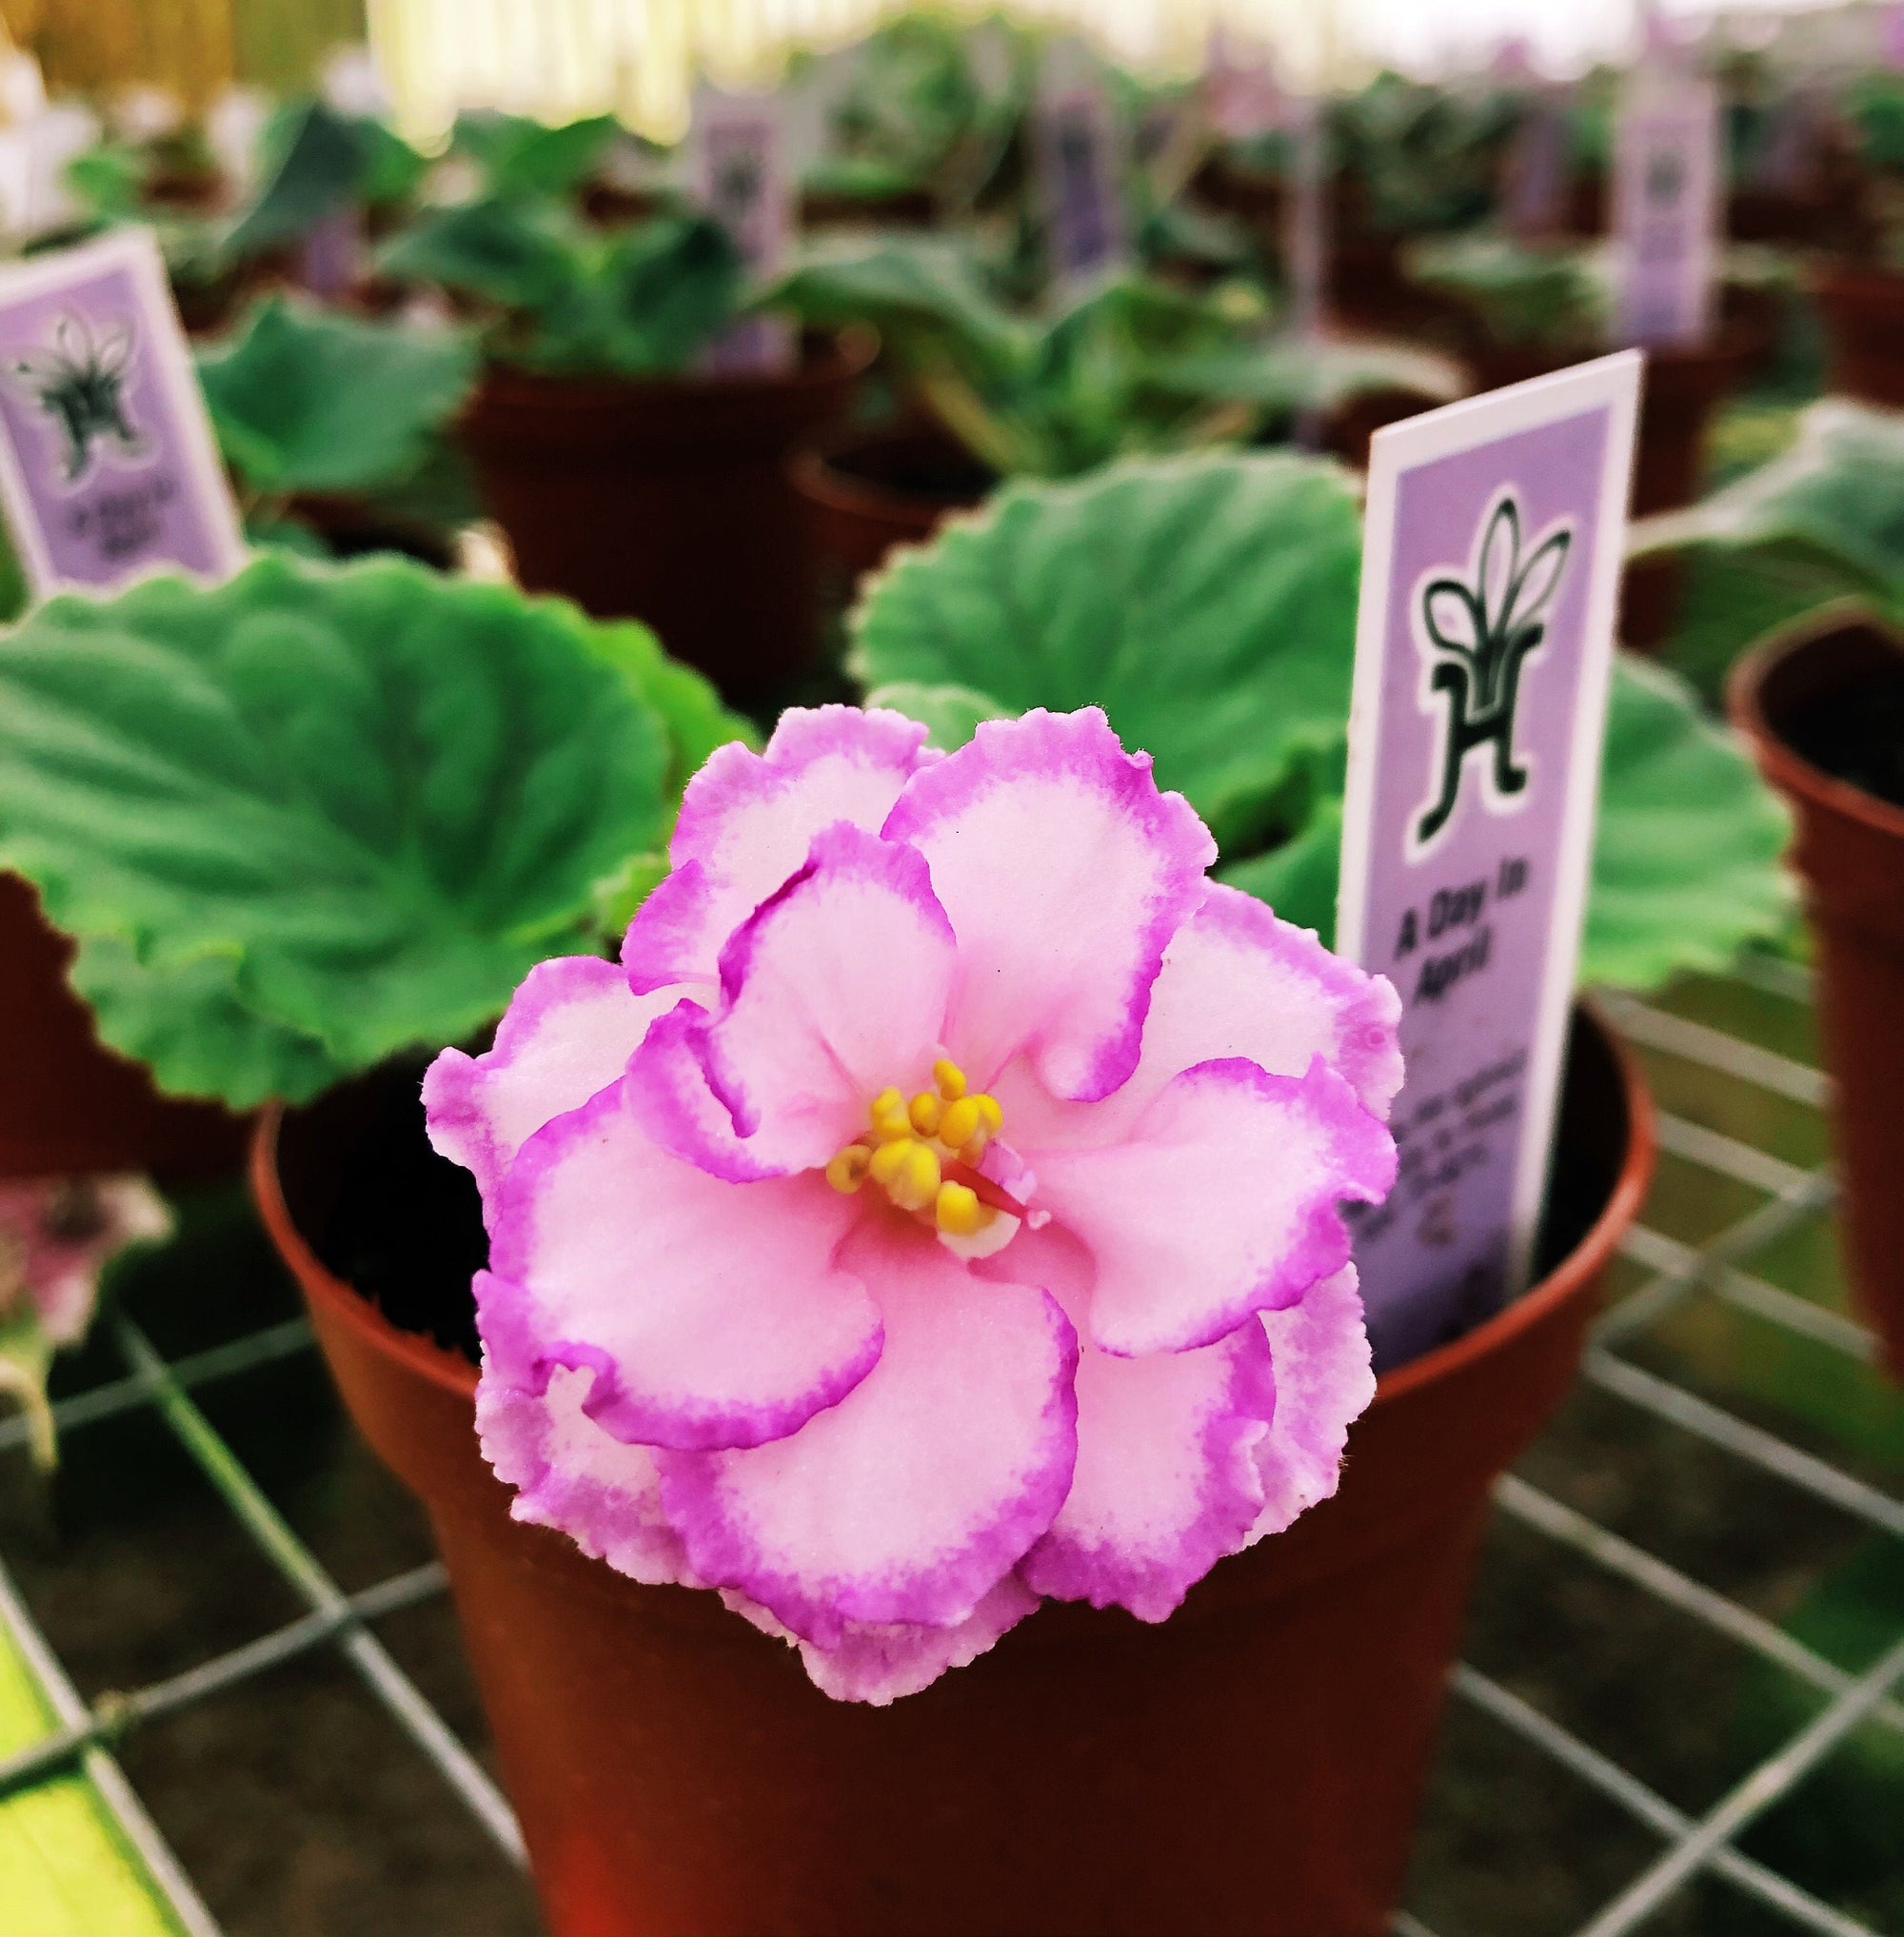 Live house plant variegated ruffle frilled bloom African Violet ‘A Day in April’ garden 4” flower Potted gift